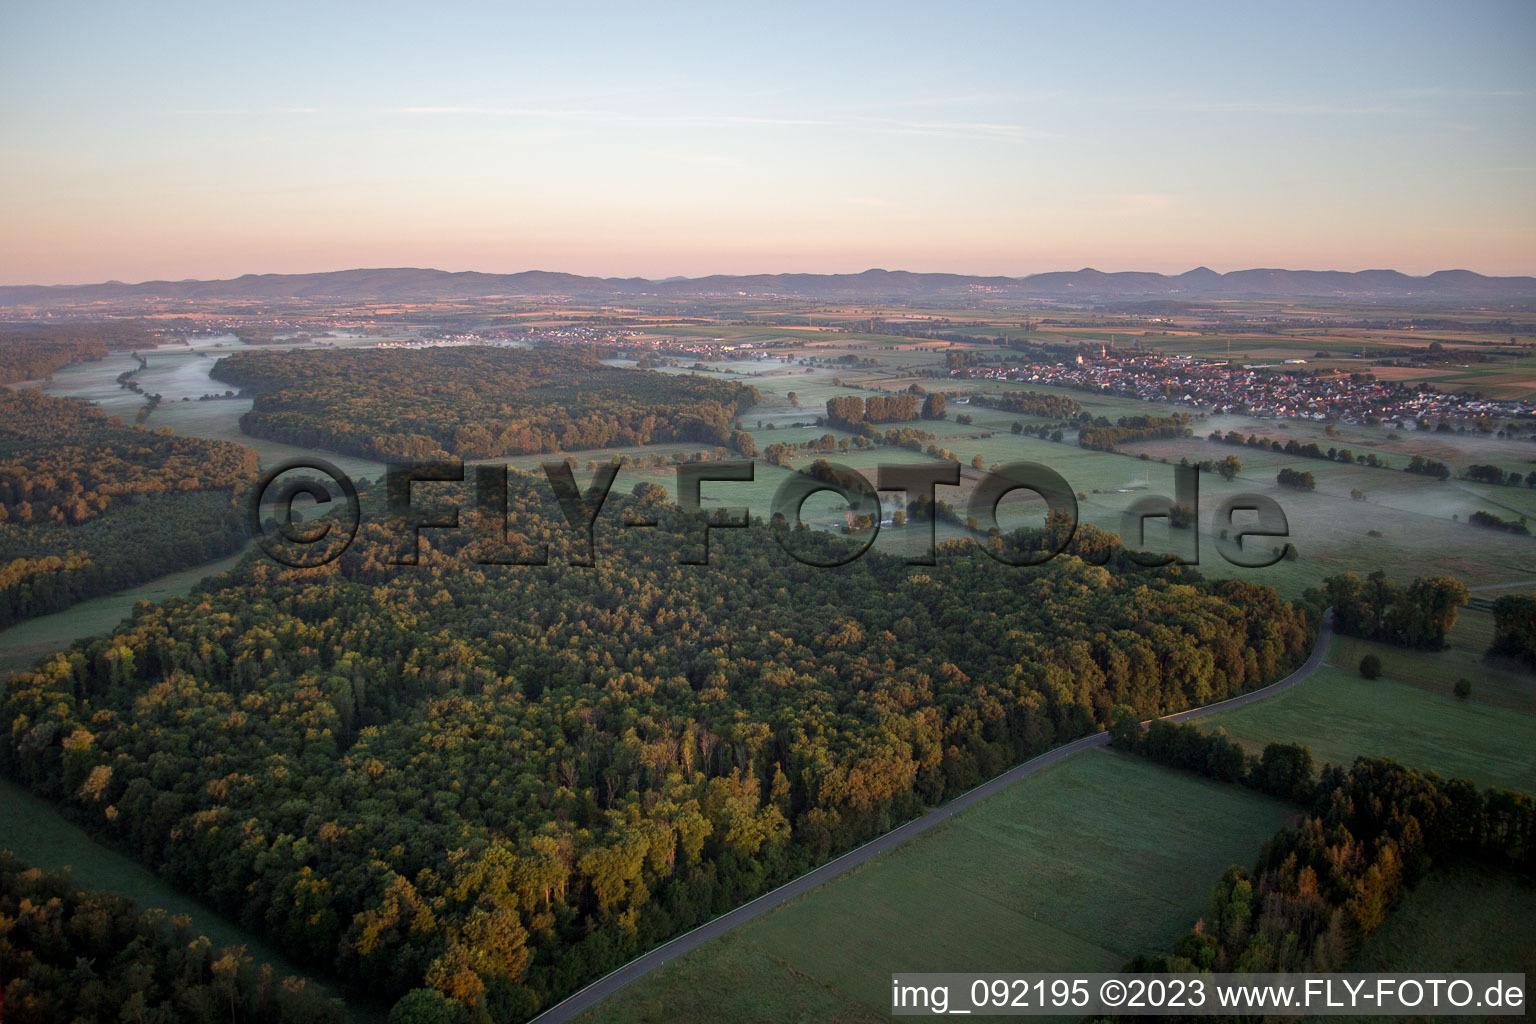 Drone recording of Minfeld in the state Rhineland-Palatinate, Germany